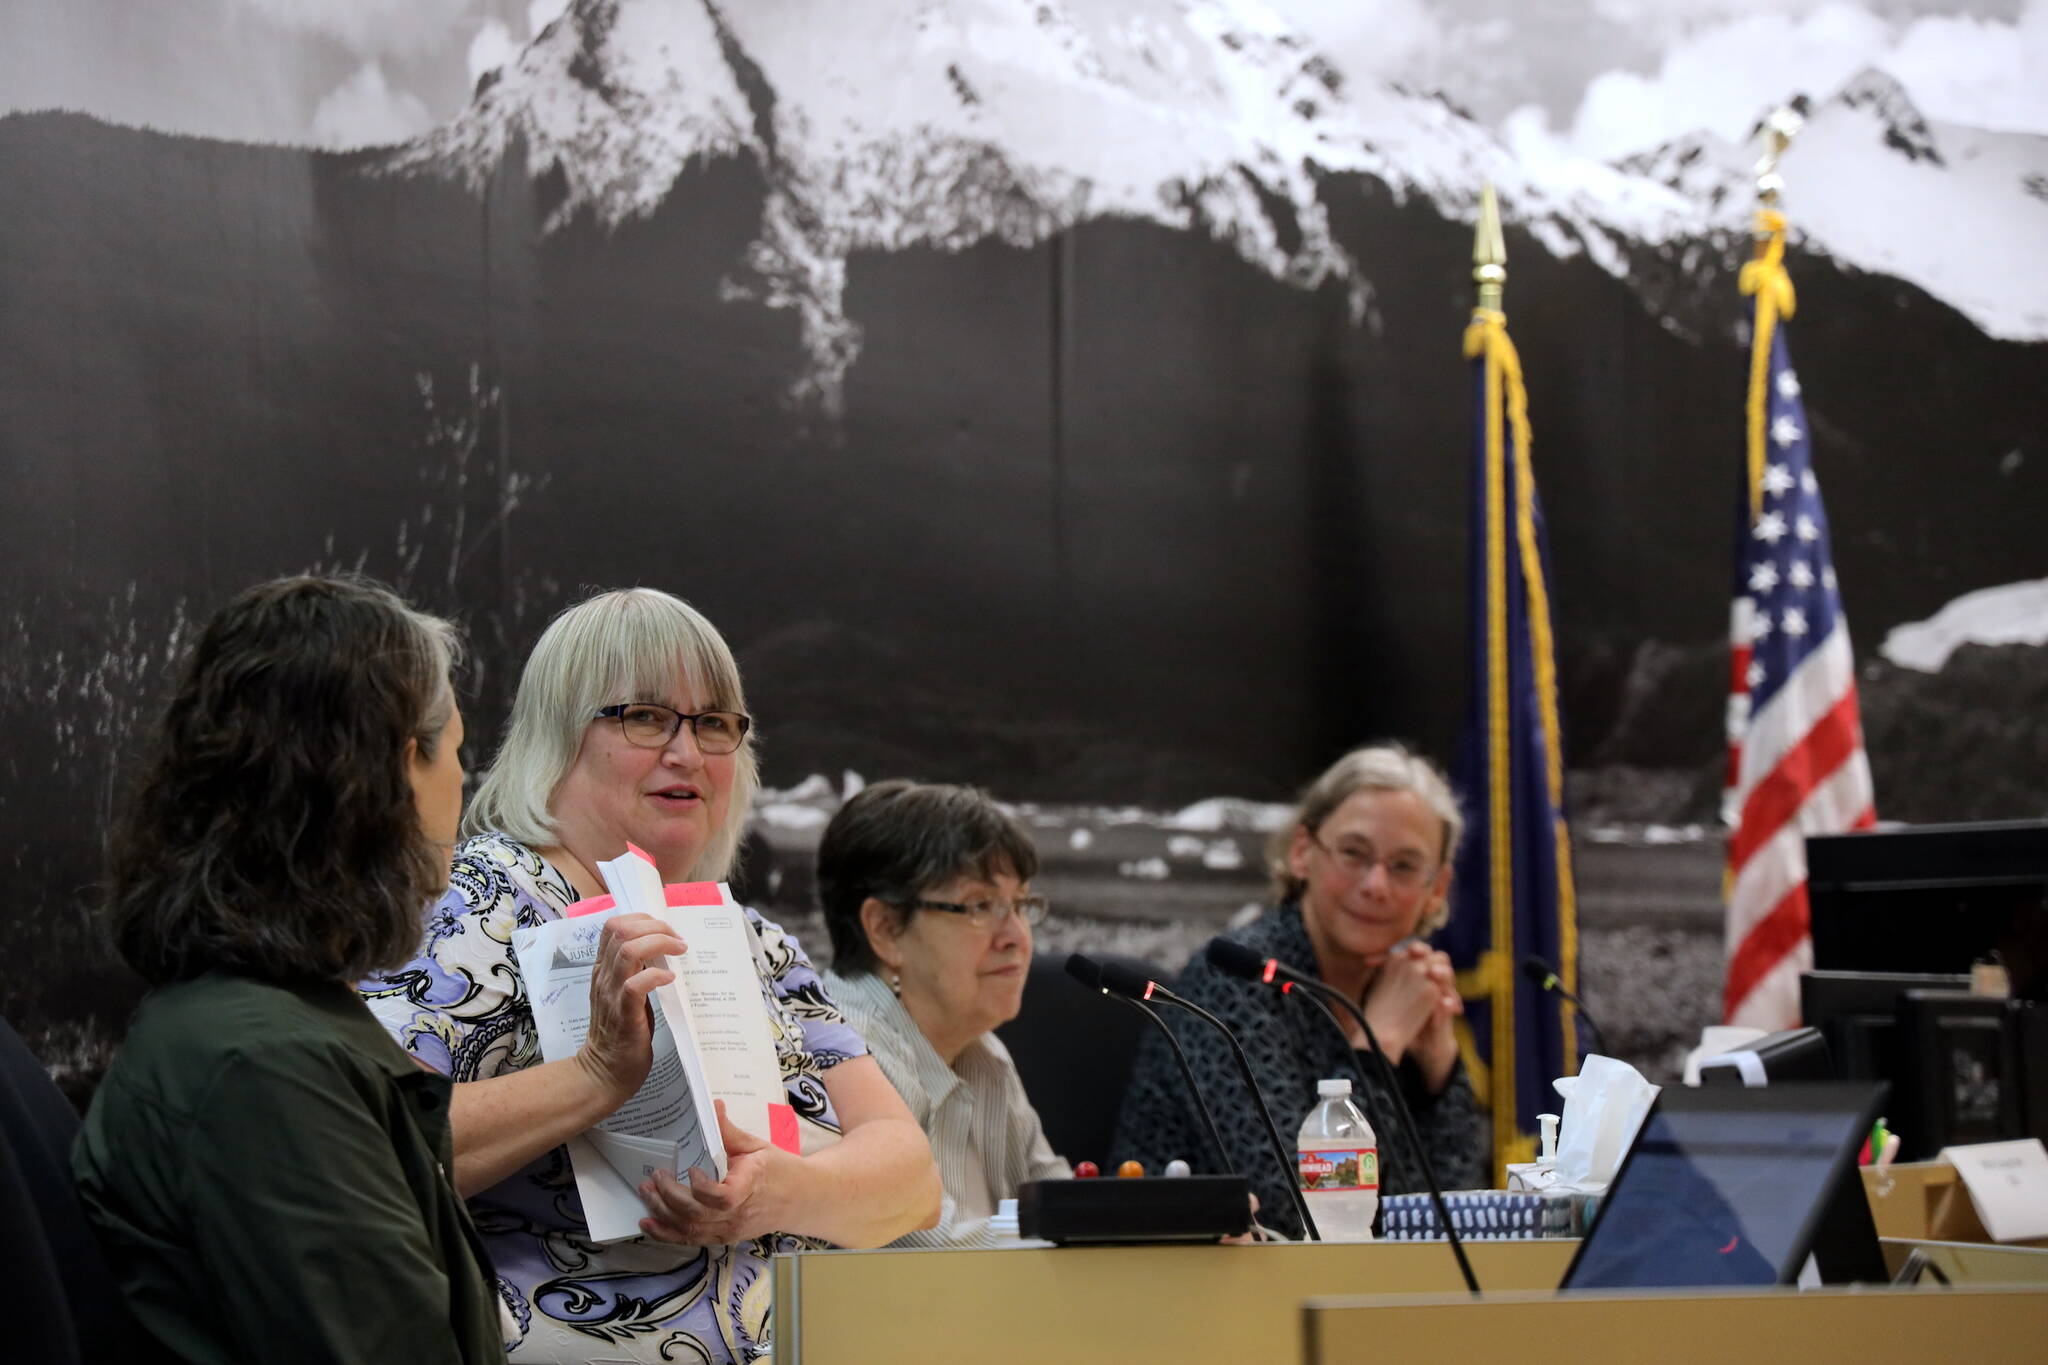 Mayor Beth Weldon flips through an Assembly meeting agenda to give a glimpse at the workload potential candidates for the upcoming election can expect if elected into local office. Weldon was joined by Kristin Bartlett, chief of staff for the Juneau School District (left), Juneau School Board President Deedie Sorenson (middle right) and Mila Cosgrove, former deputy city manager (right), at the City and Borough of Juneau’s annual “How To Run For Local Office” workshop Saturday. (Clarise Larson / Juneau Empire)